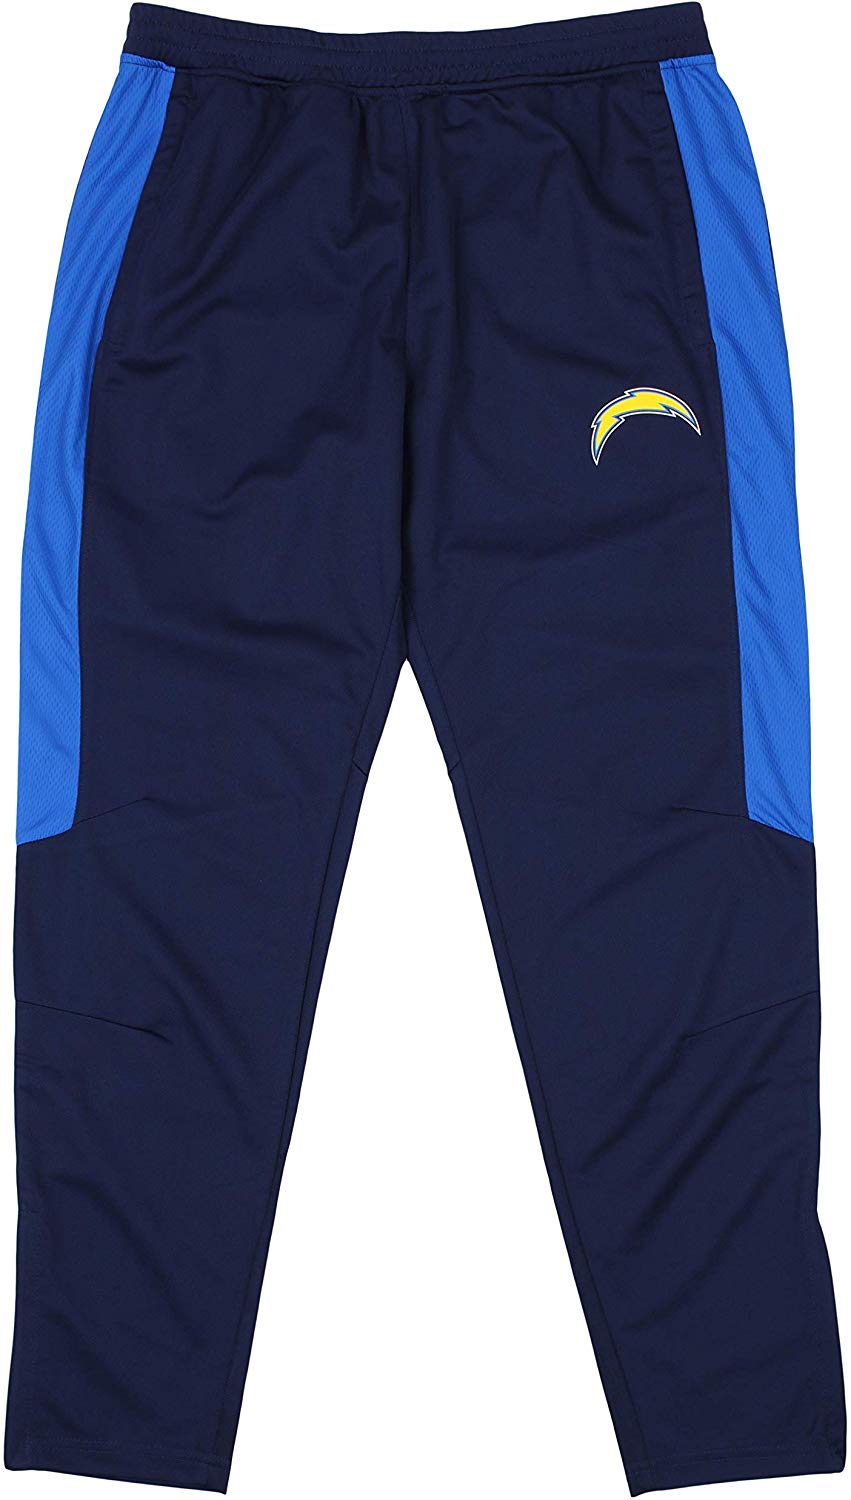 Zubaz NFL Football Men's Los Angeles Chargers Athletic Track Pant